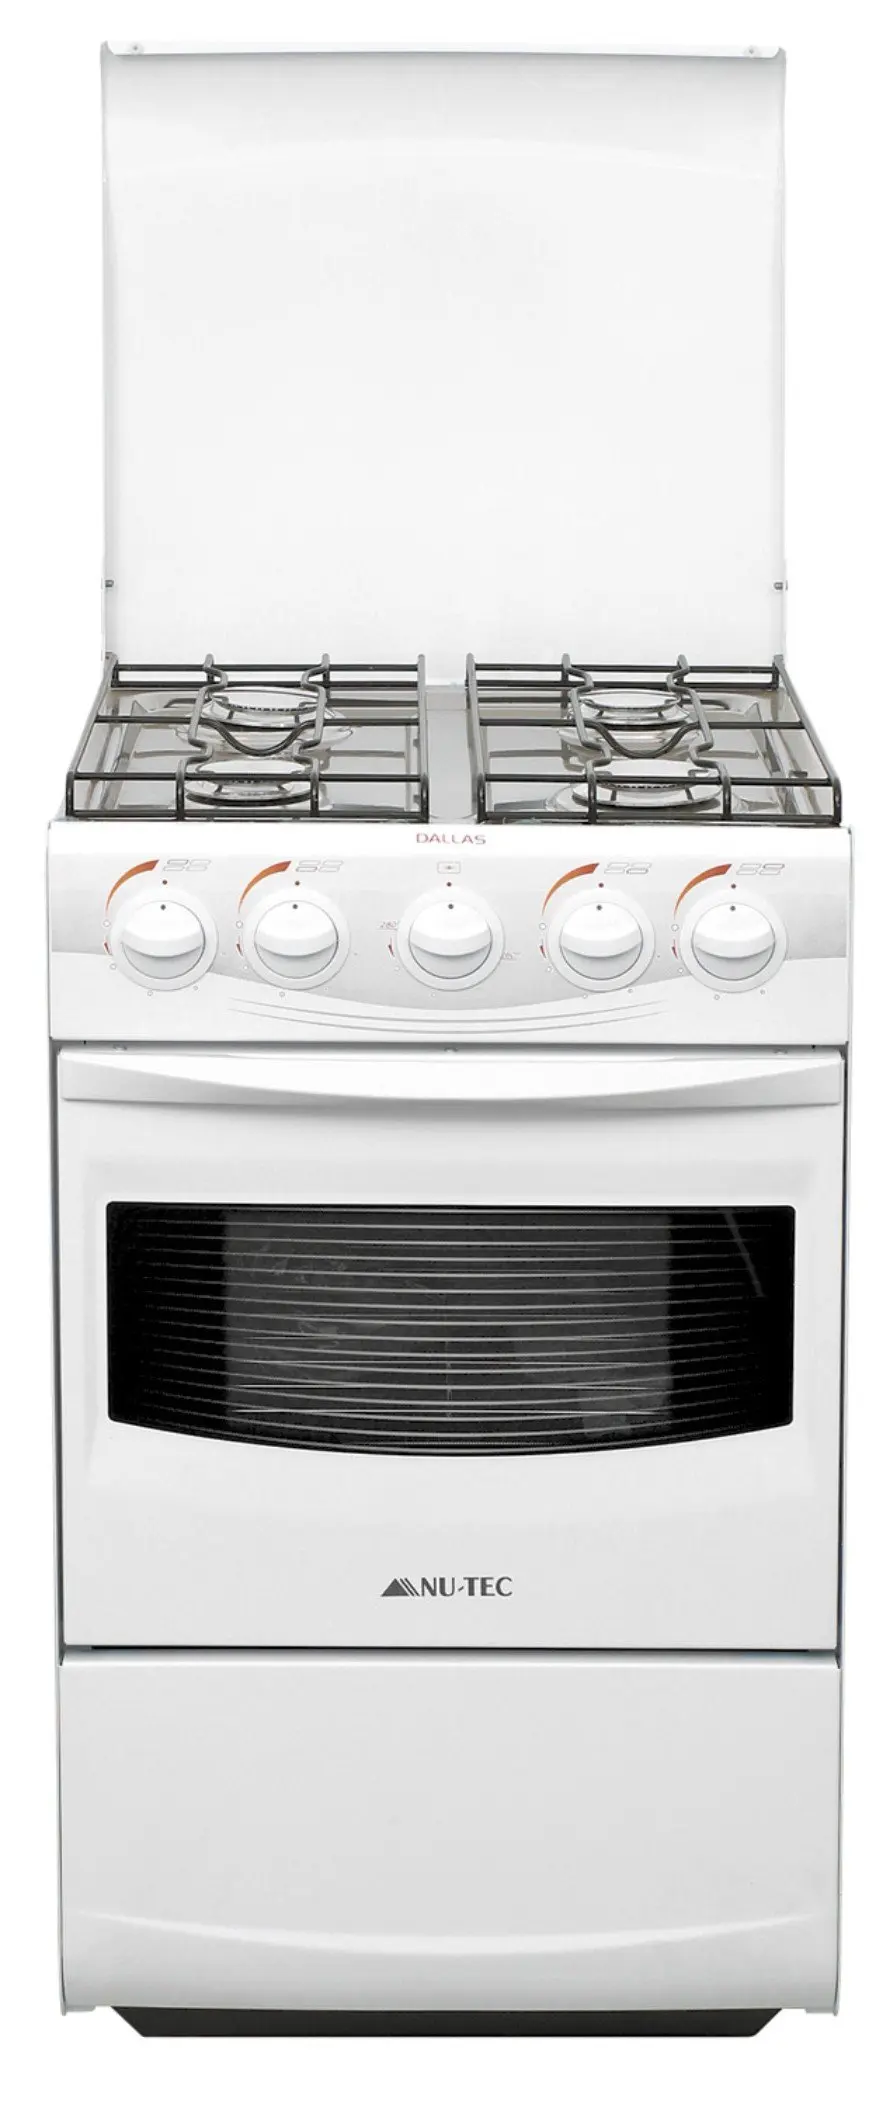 gas cookers for sale